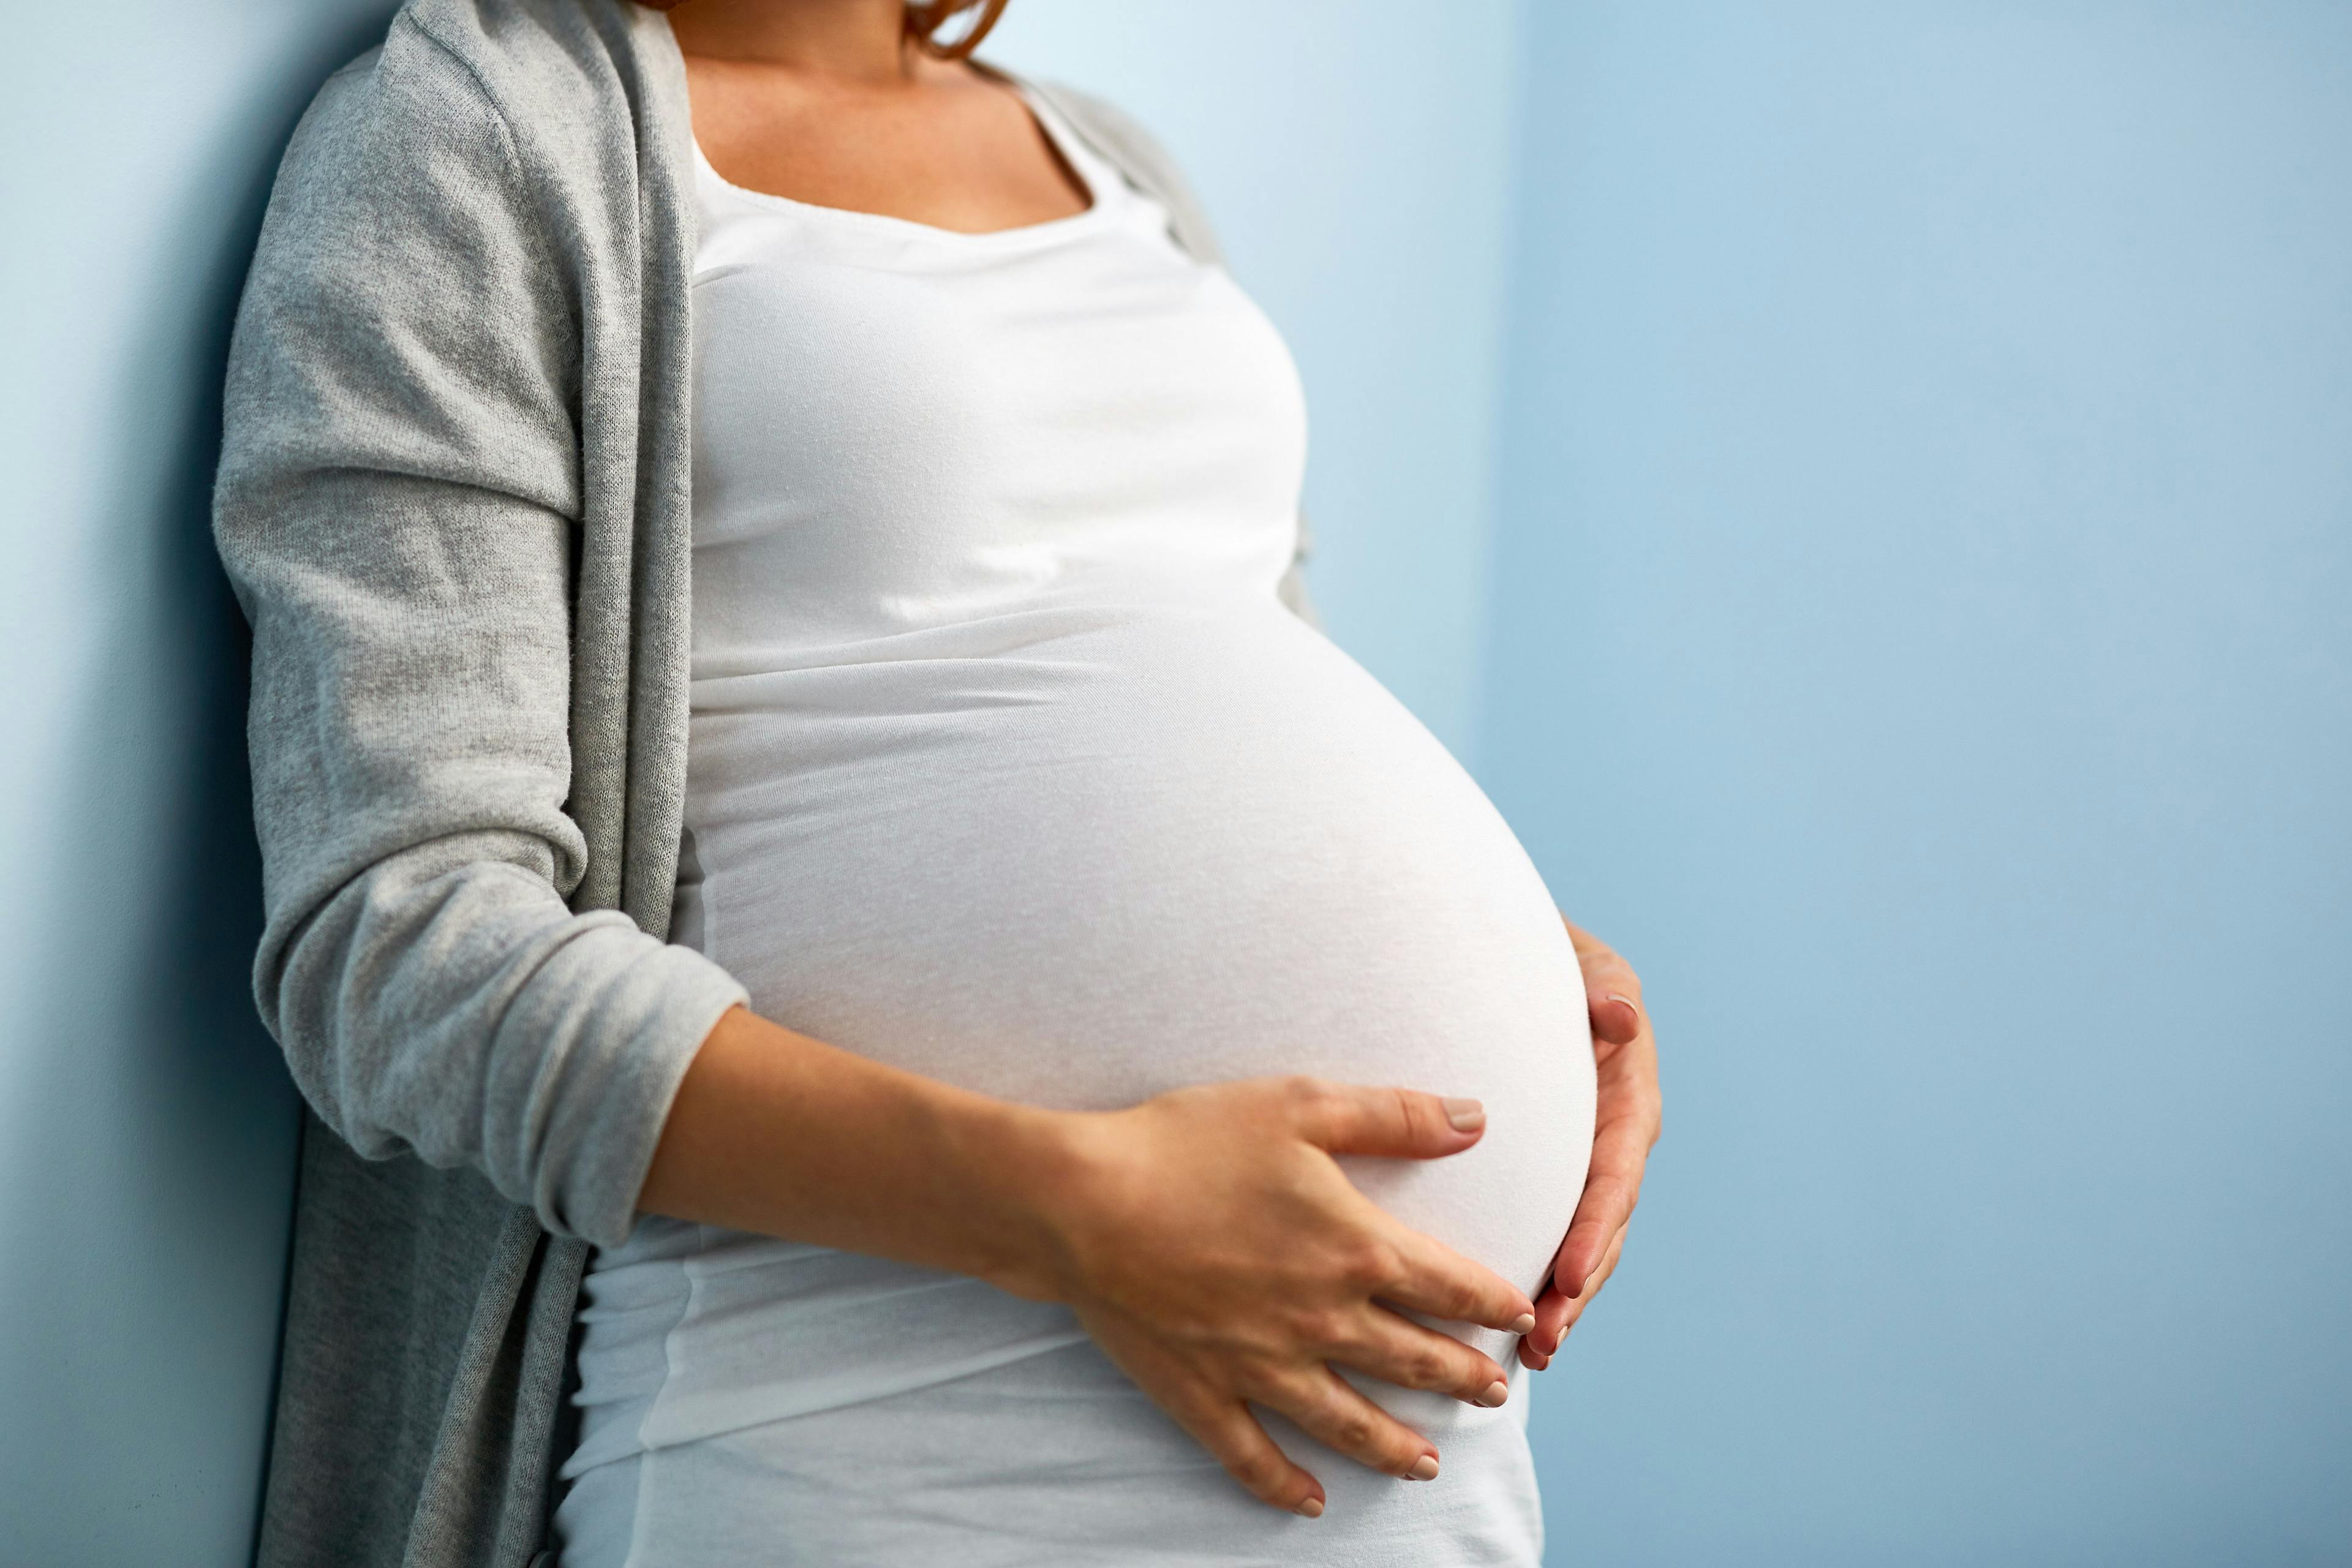 Mid-section portrait of a woman during last months of pregnancy | Image credit: pressmaster - stock.adobe.com